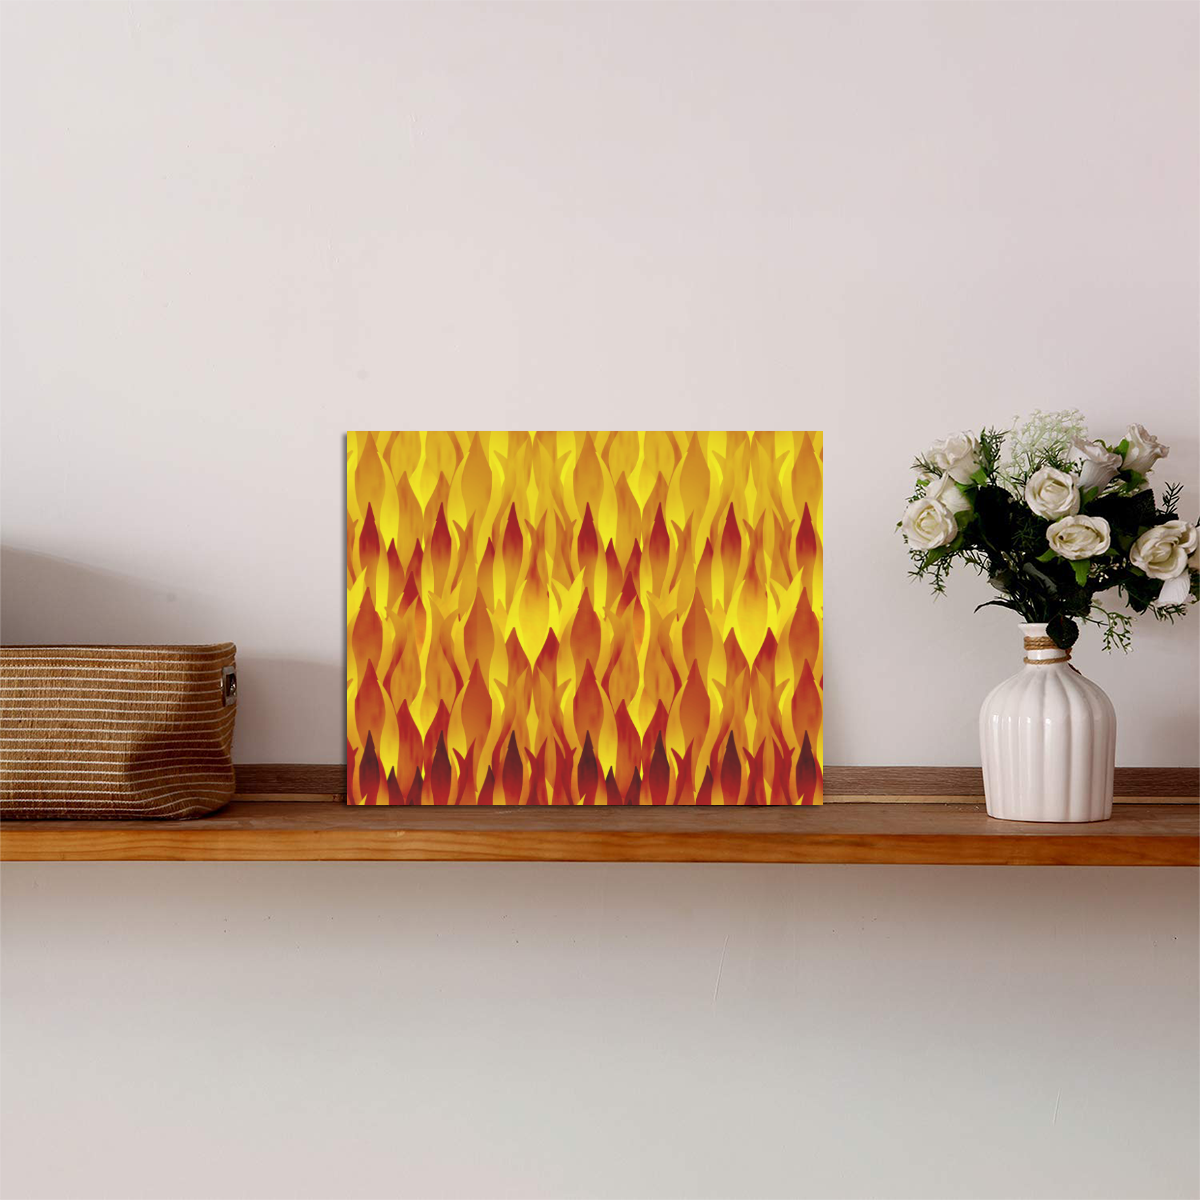 Hot Fire and Flames Illustration Photo Panel for Tabletop Display 8"x6"